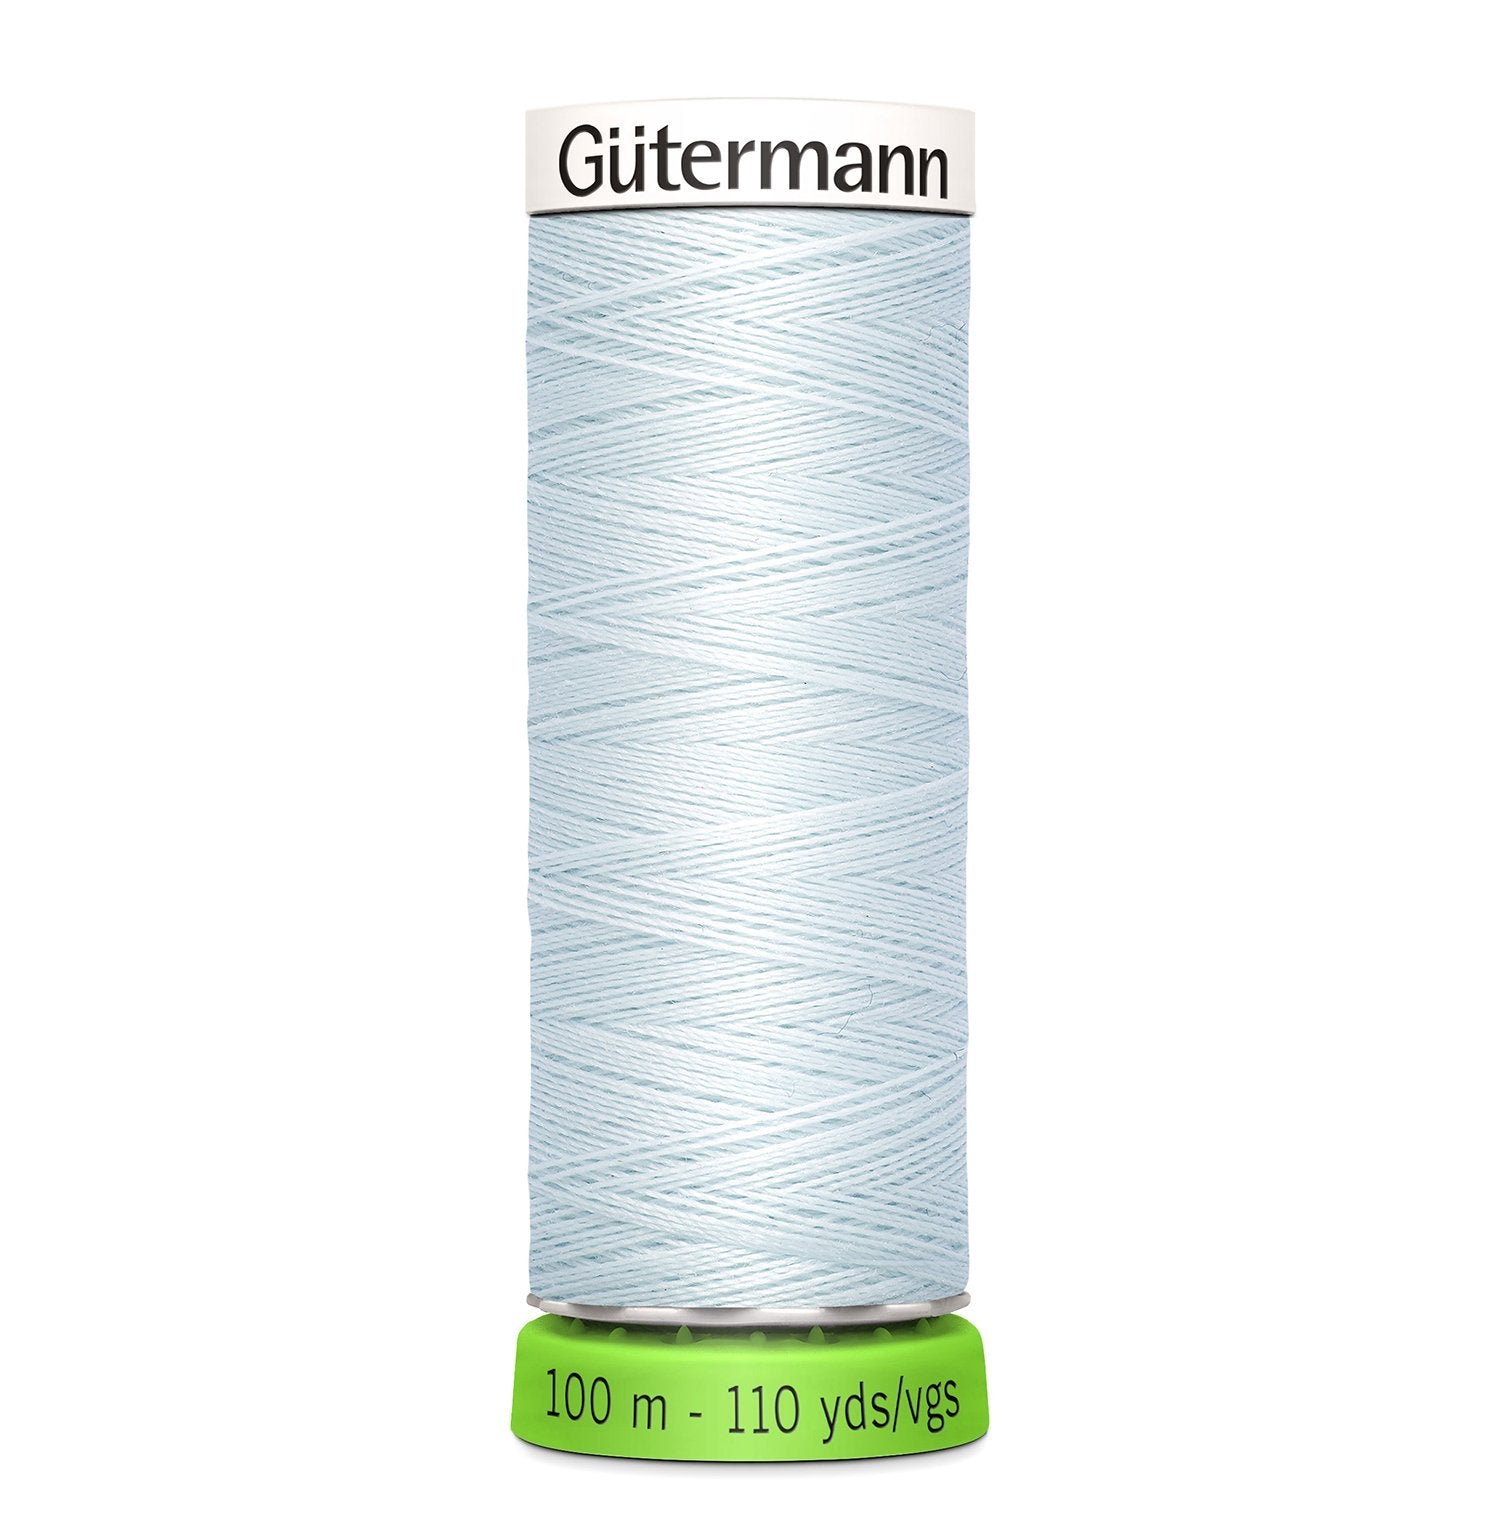 Gutermann Recycled Thread 100m, Colour 193 from Jaycotts Sewing Supplies